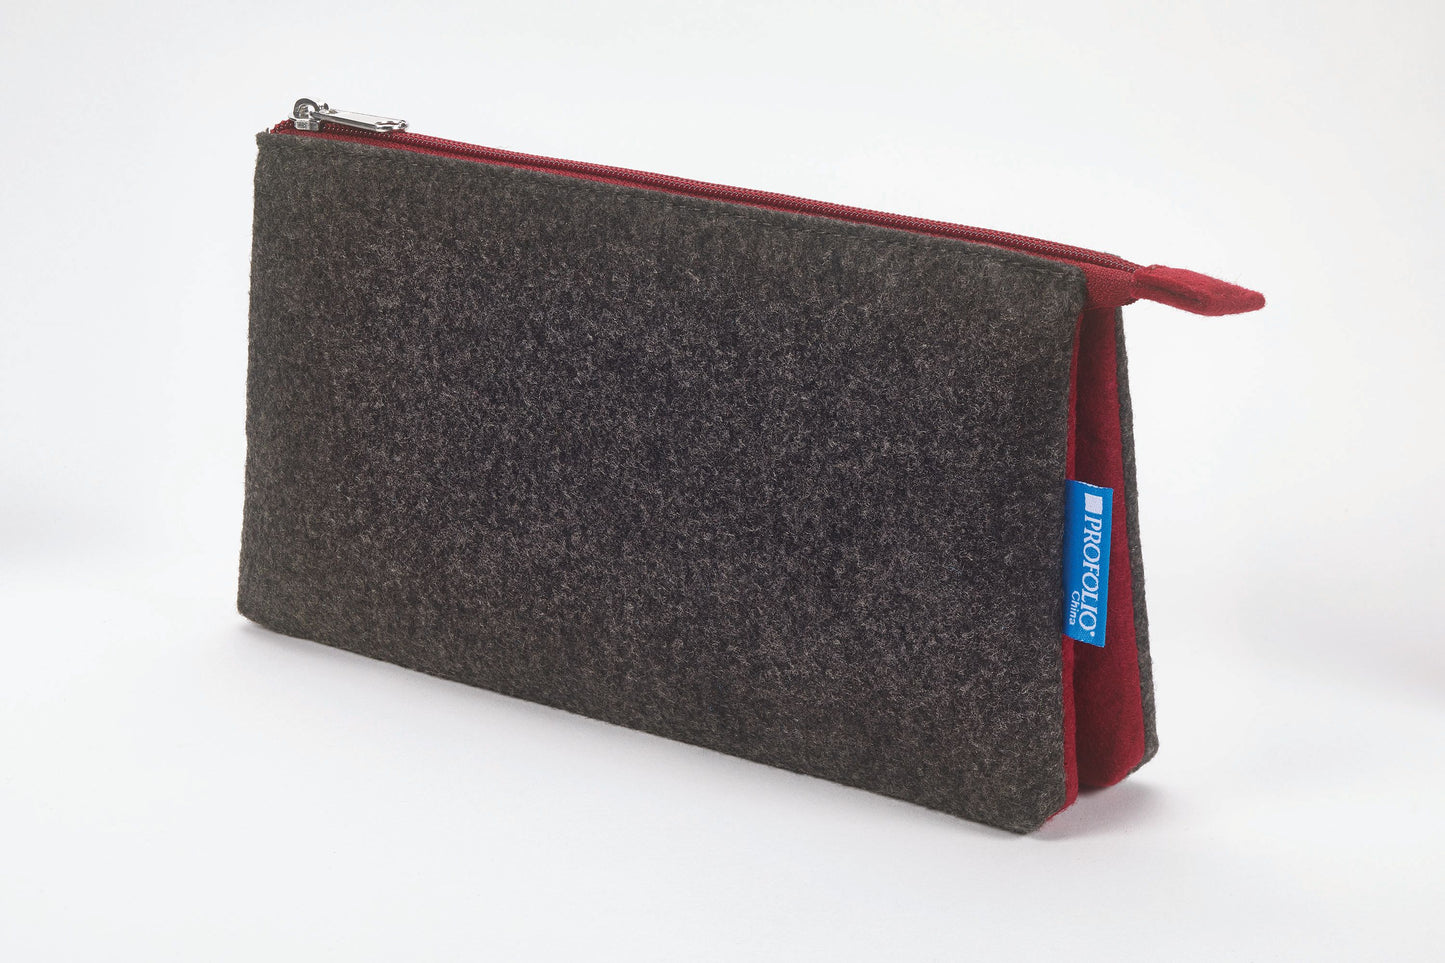 5"x9" Charcoal/Maroon Midtown Pouch